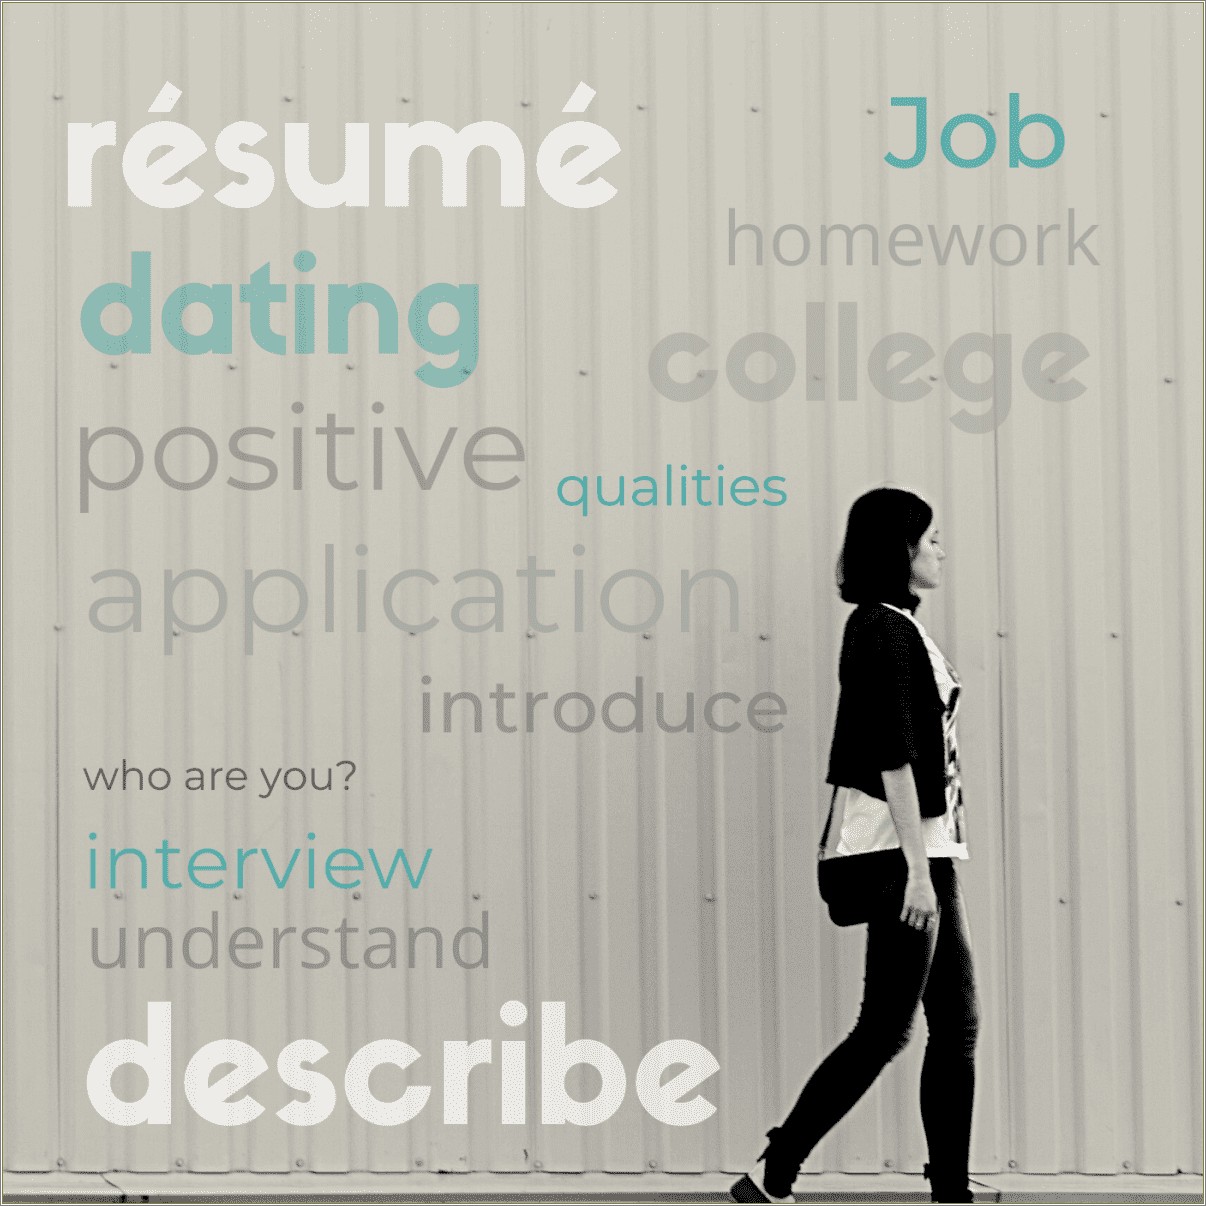 Bad Qualities To Put On A Resume